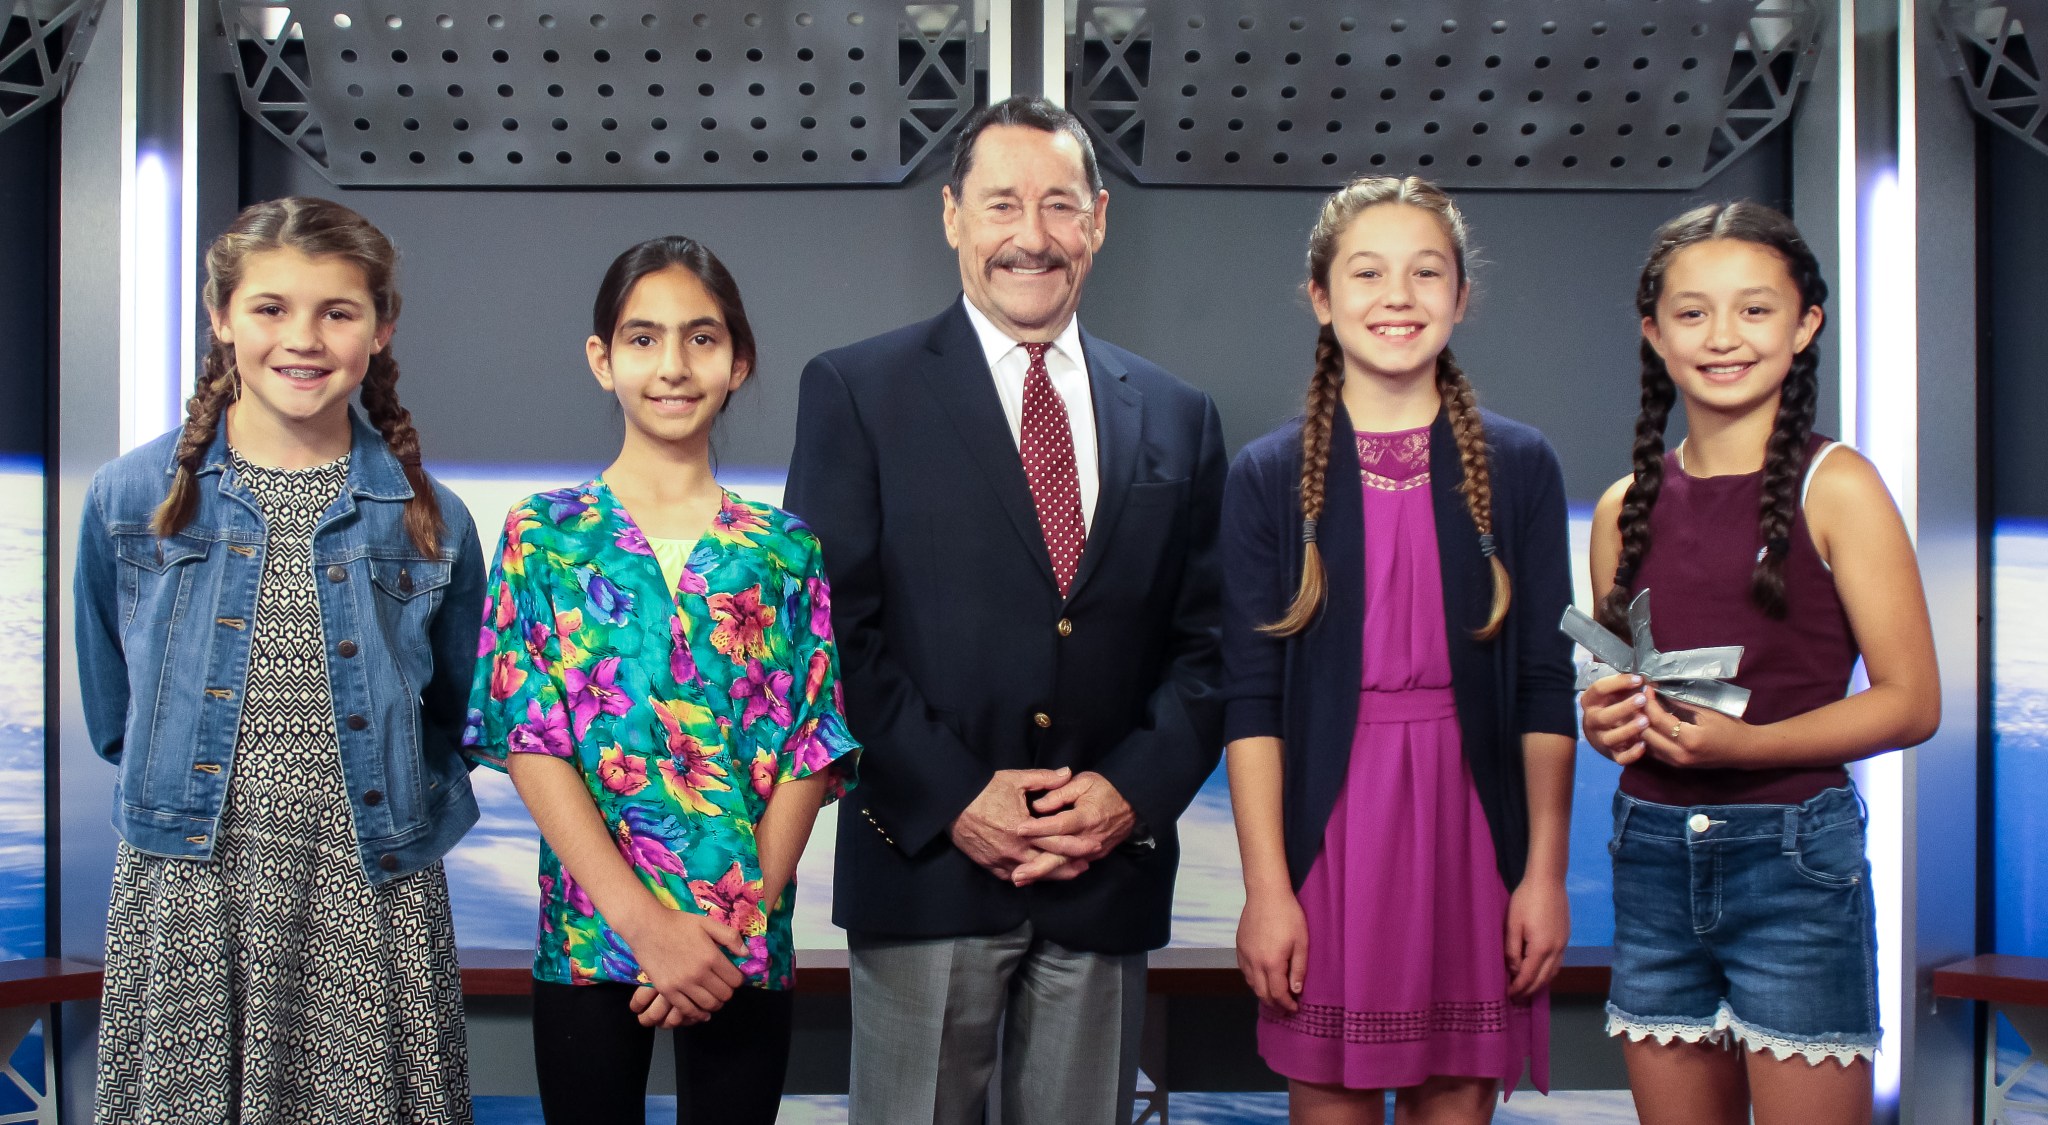 Winners of OPSPARC challenge pose with Peter Cullen. The winners are four young girls standing in a line with Peter in front of a backdrop that looks like space. 